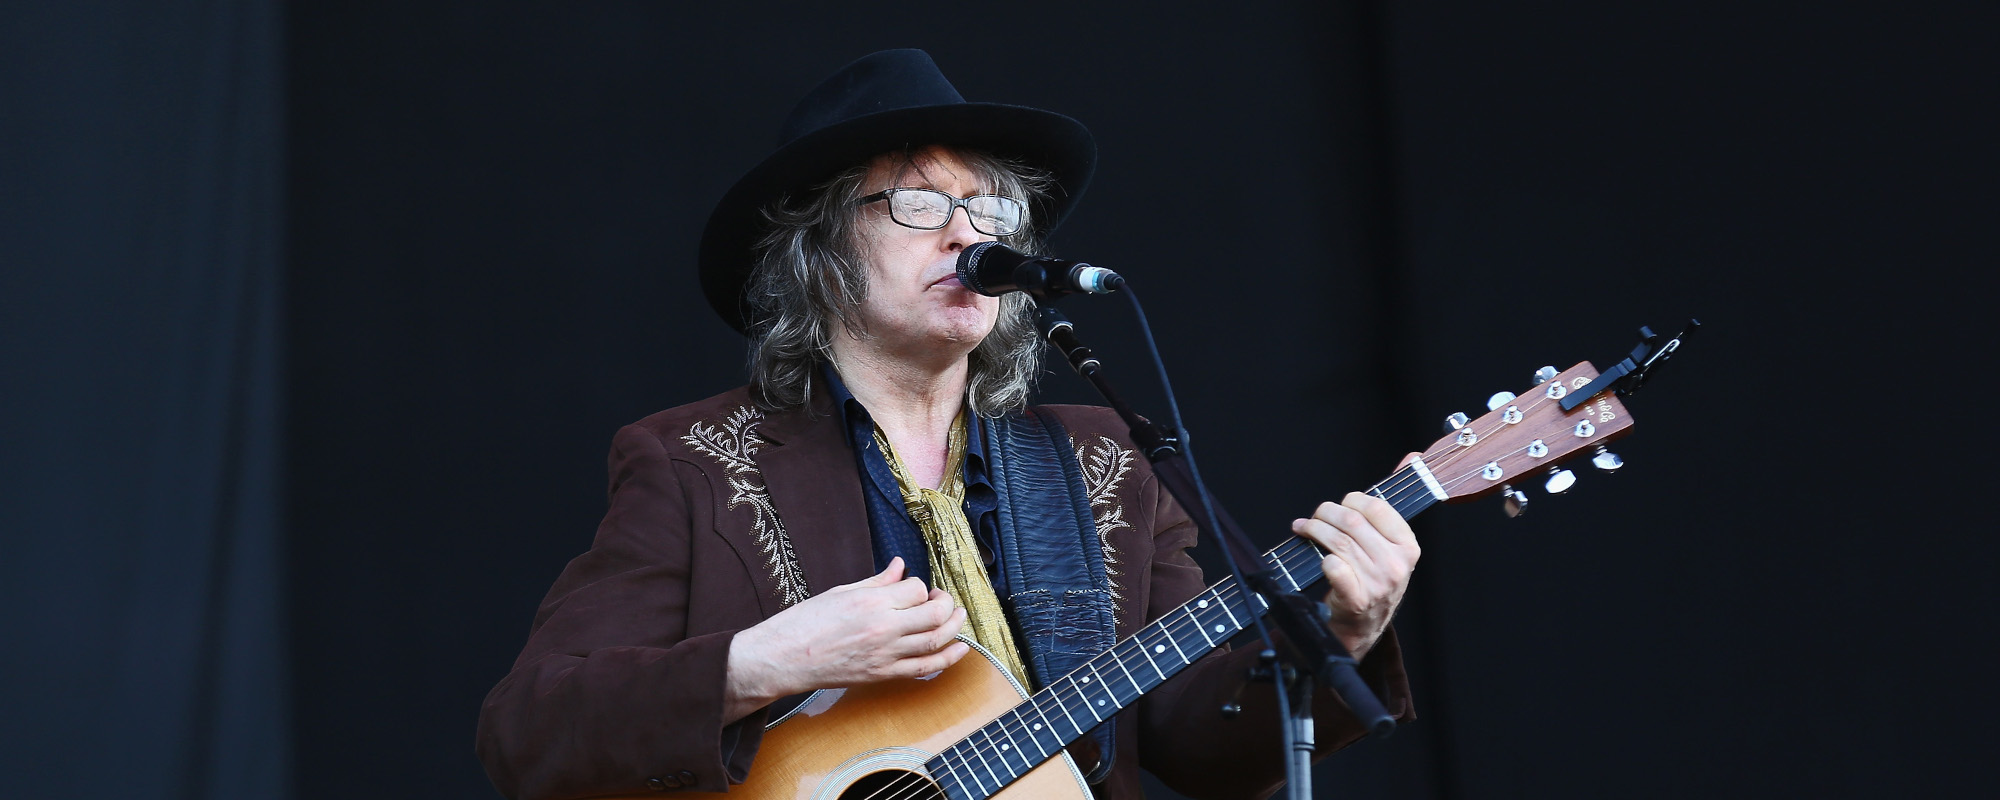 The Waterboys’ Mike Scott Explains the Meaning Behind Their Late ’80s Hit “World Party”